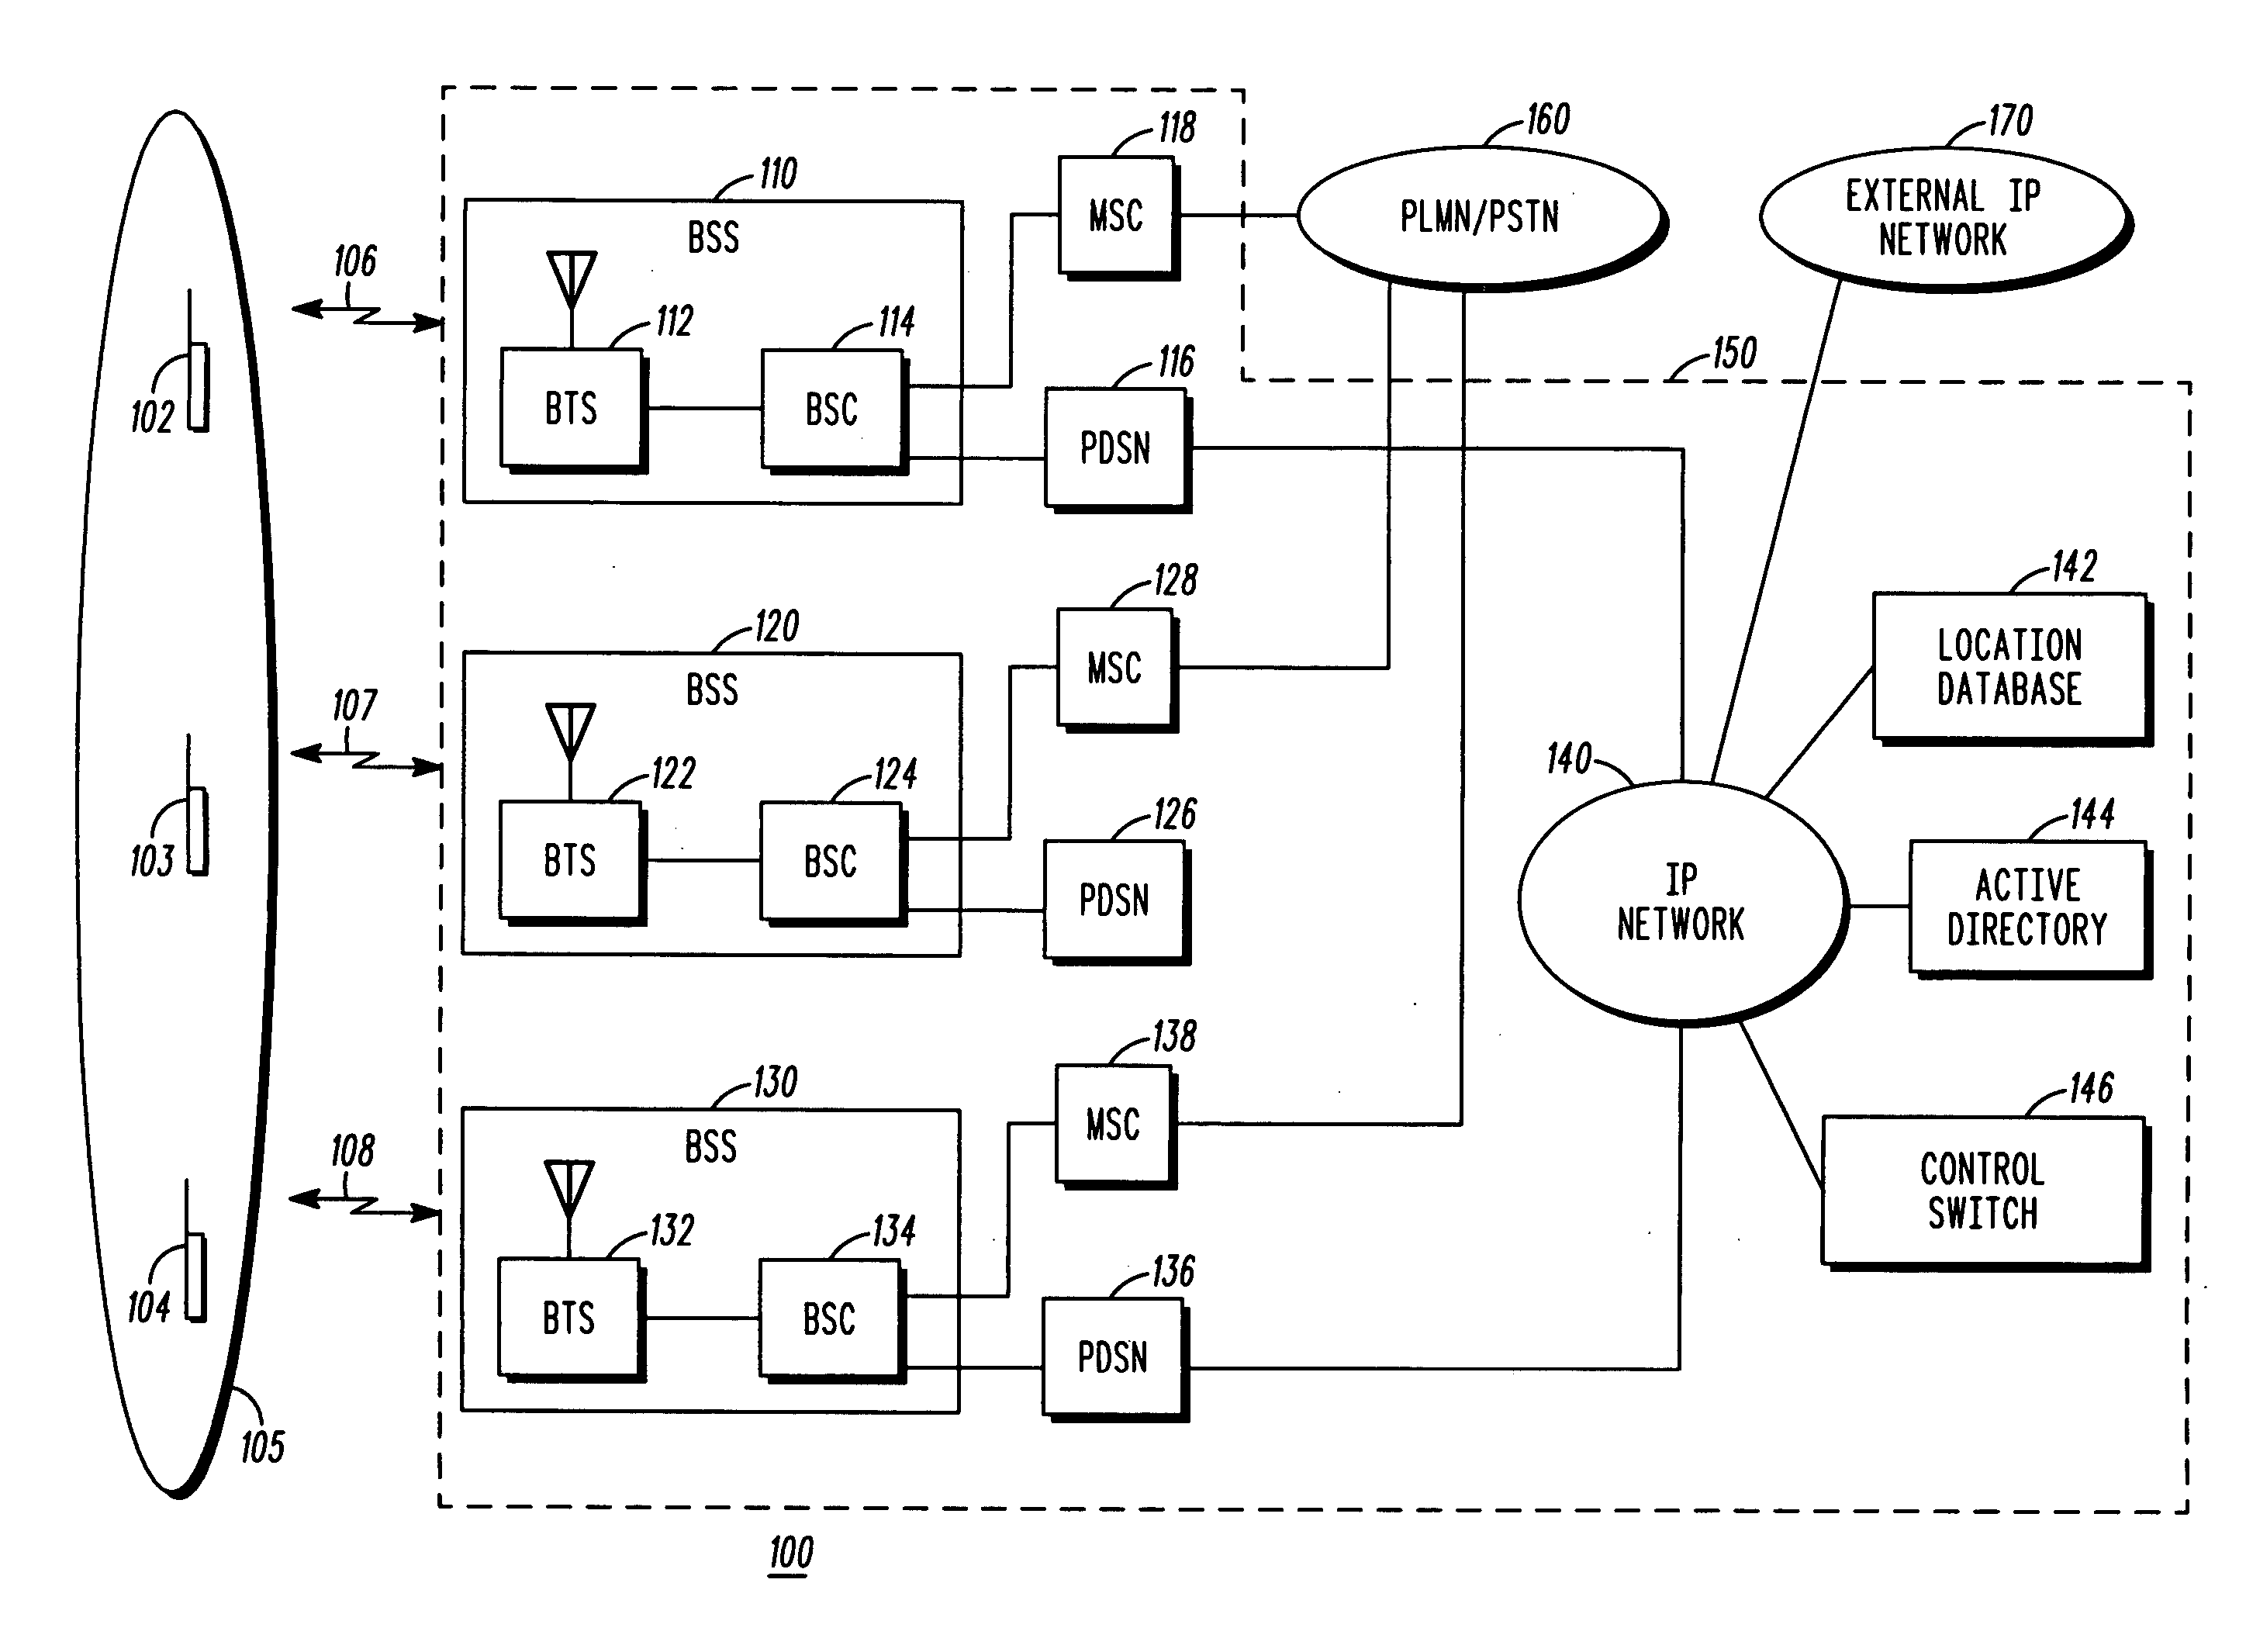 Method and apparatus for providing push-to-talk services in a cellular communication system